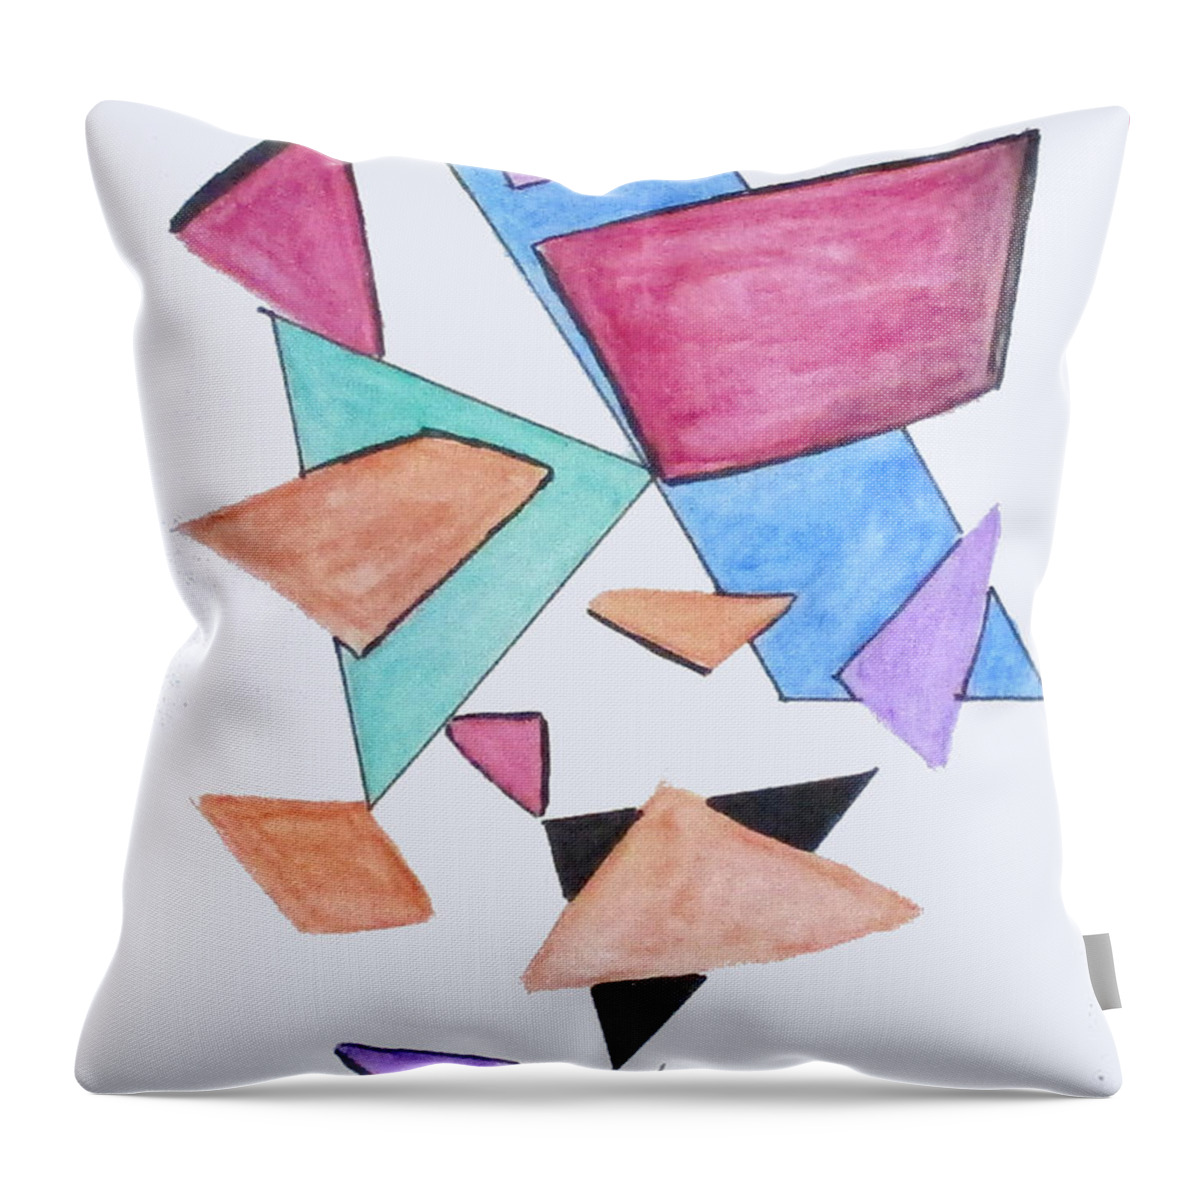 Doodling Throw Pillow featuring the painting Art Doodle No. 1 by Clyde J Kell